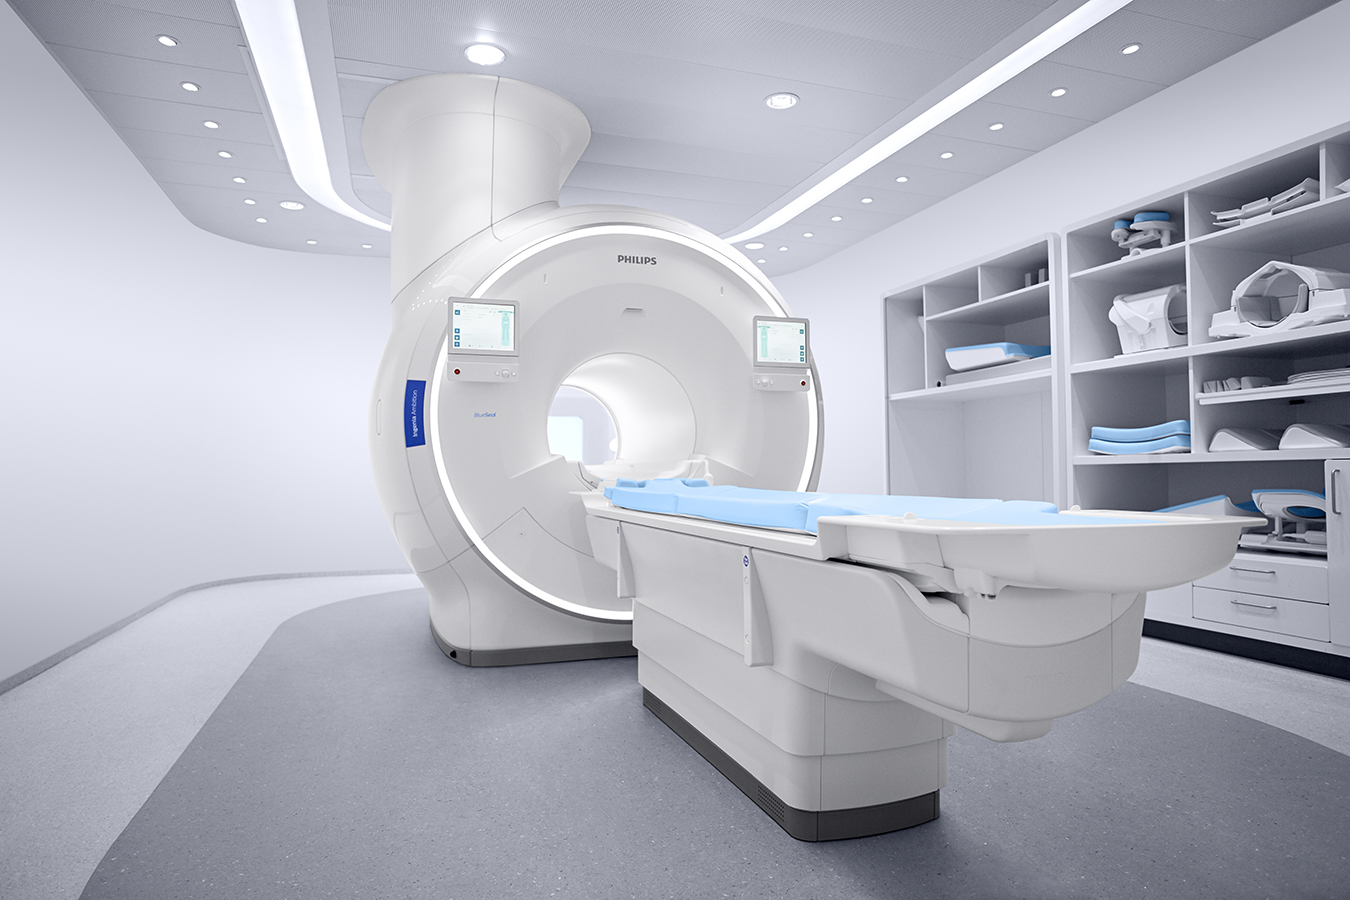 Phelps Health’s New MRI System Is First of Its Kind in Missouri